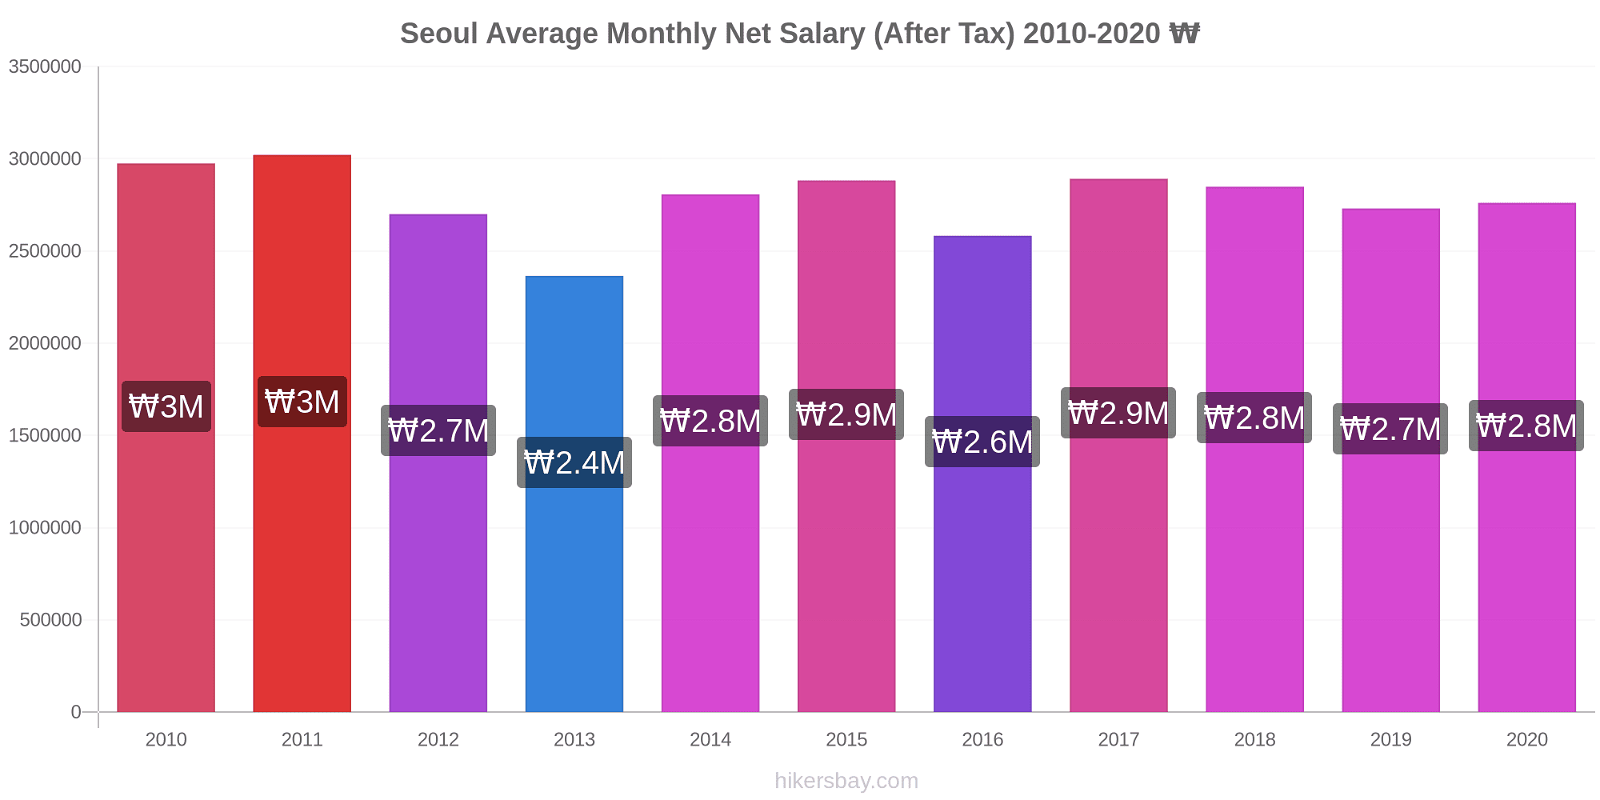 Seoul price changes Average Monthly Net Salary (After Tax) hikersbay.com